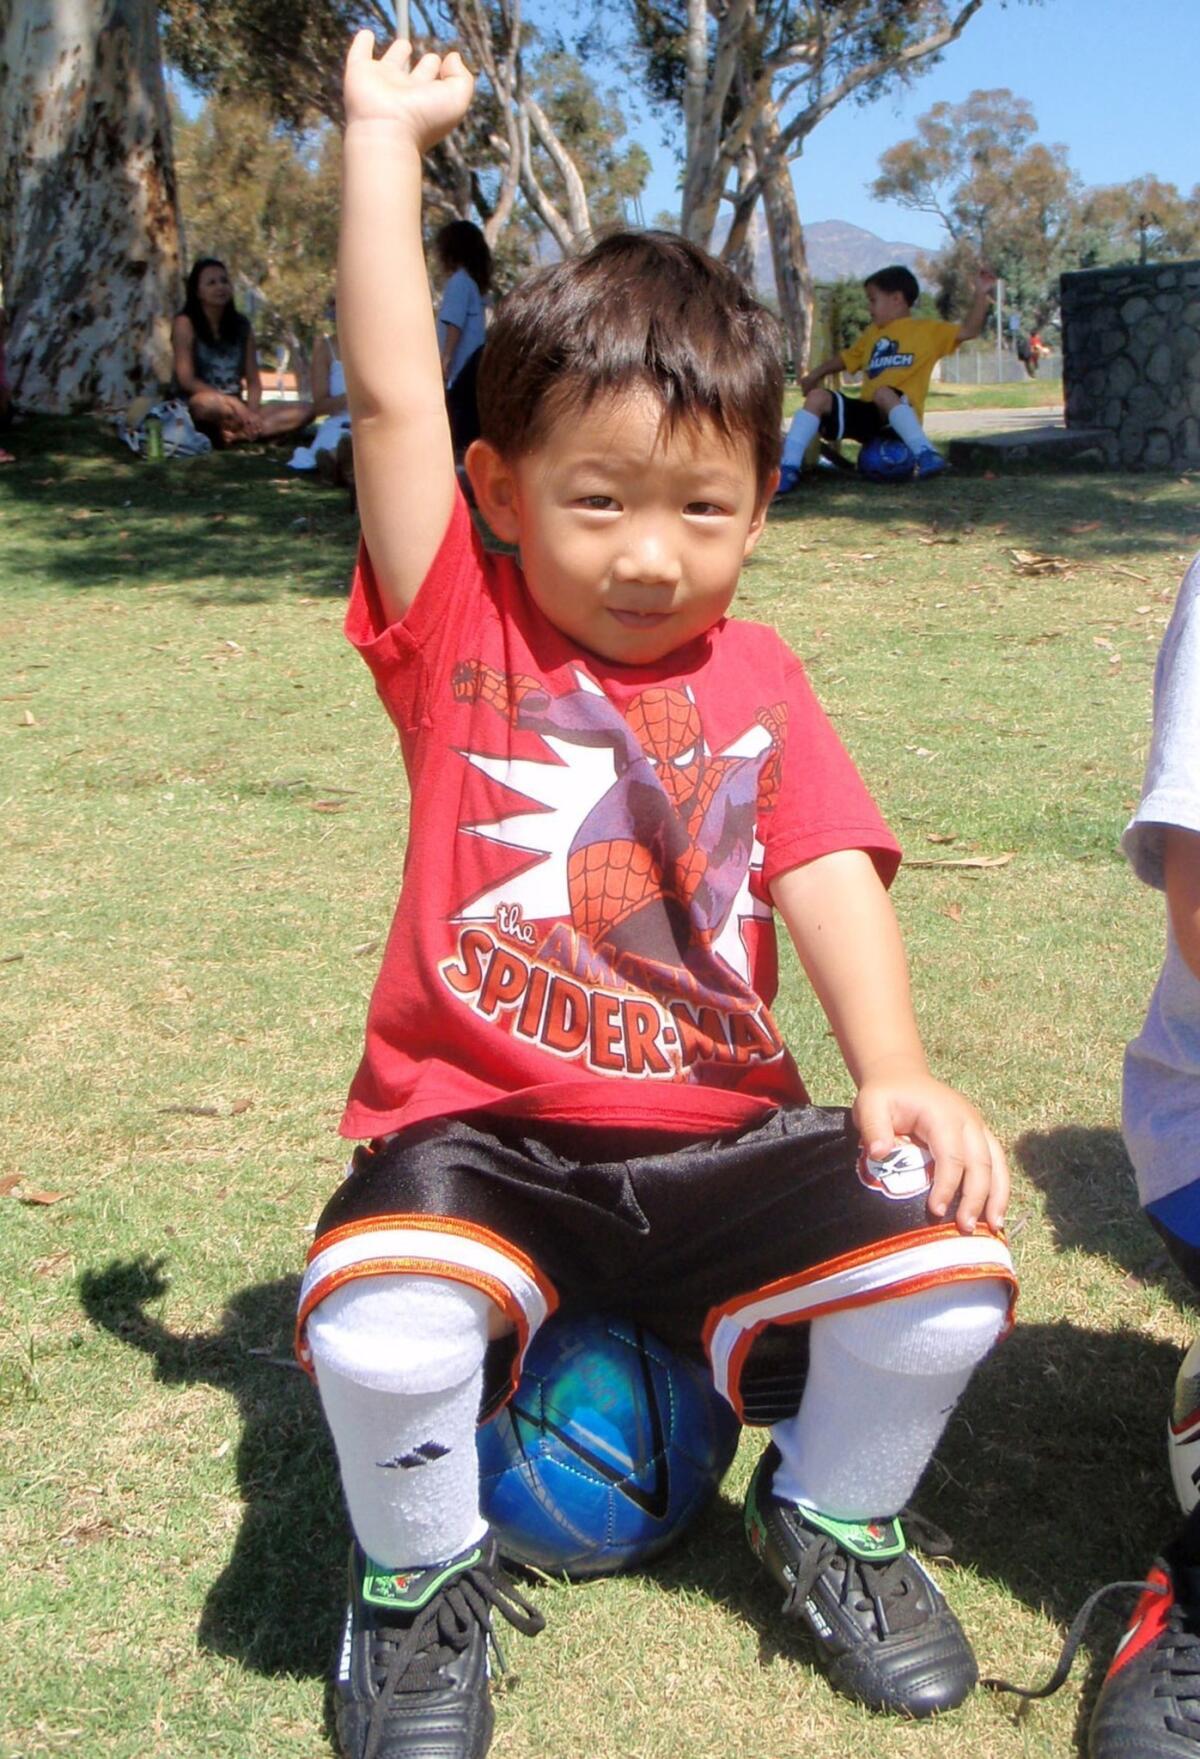 Josh, 3, at a Play 2 Grow soccer development session near the Rose Bowl.